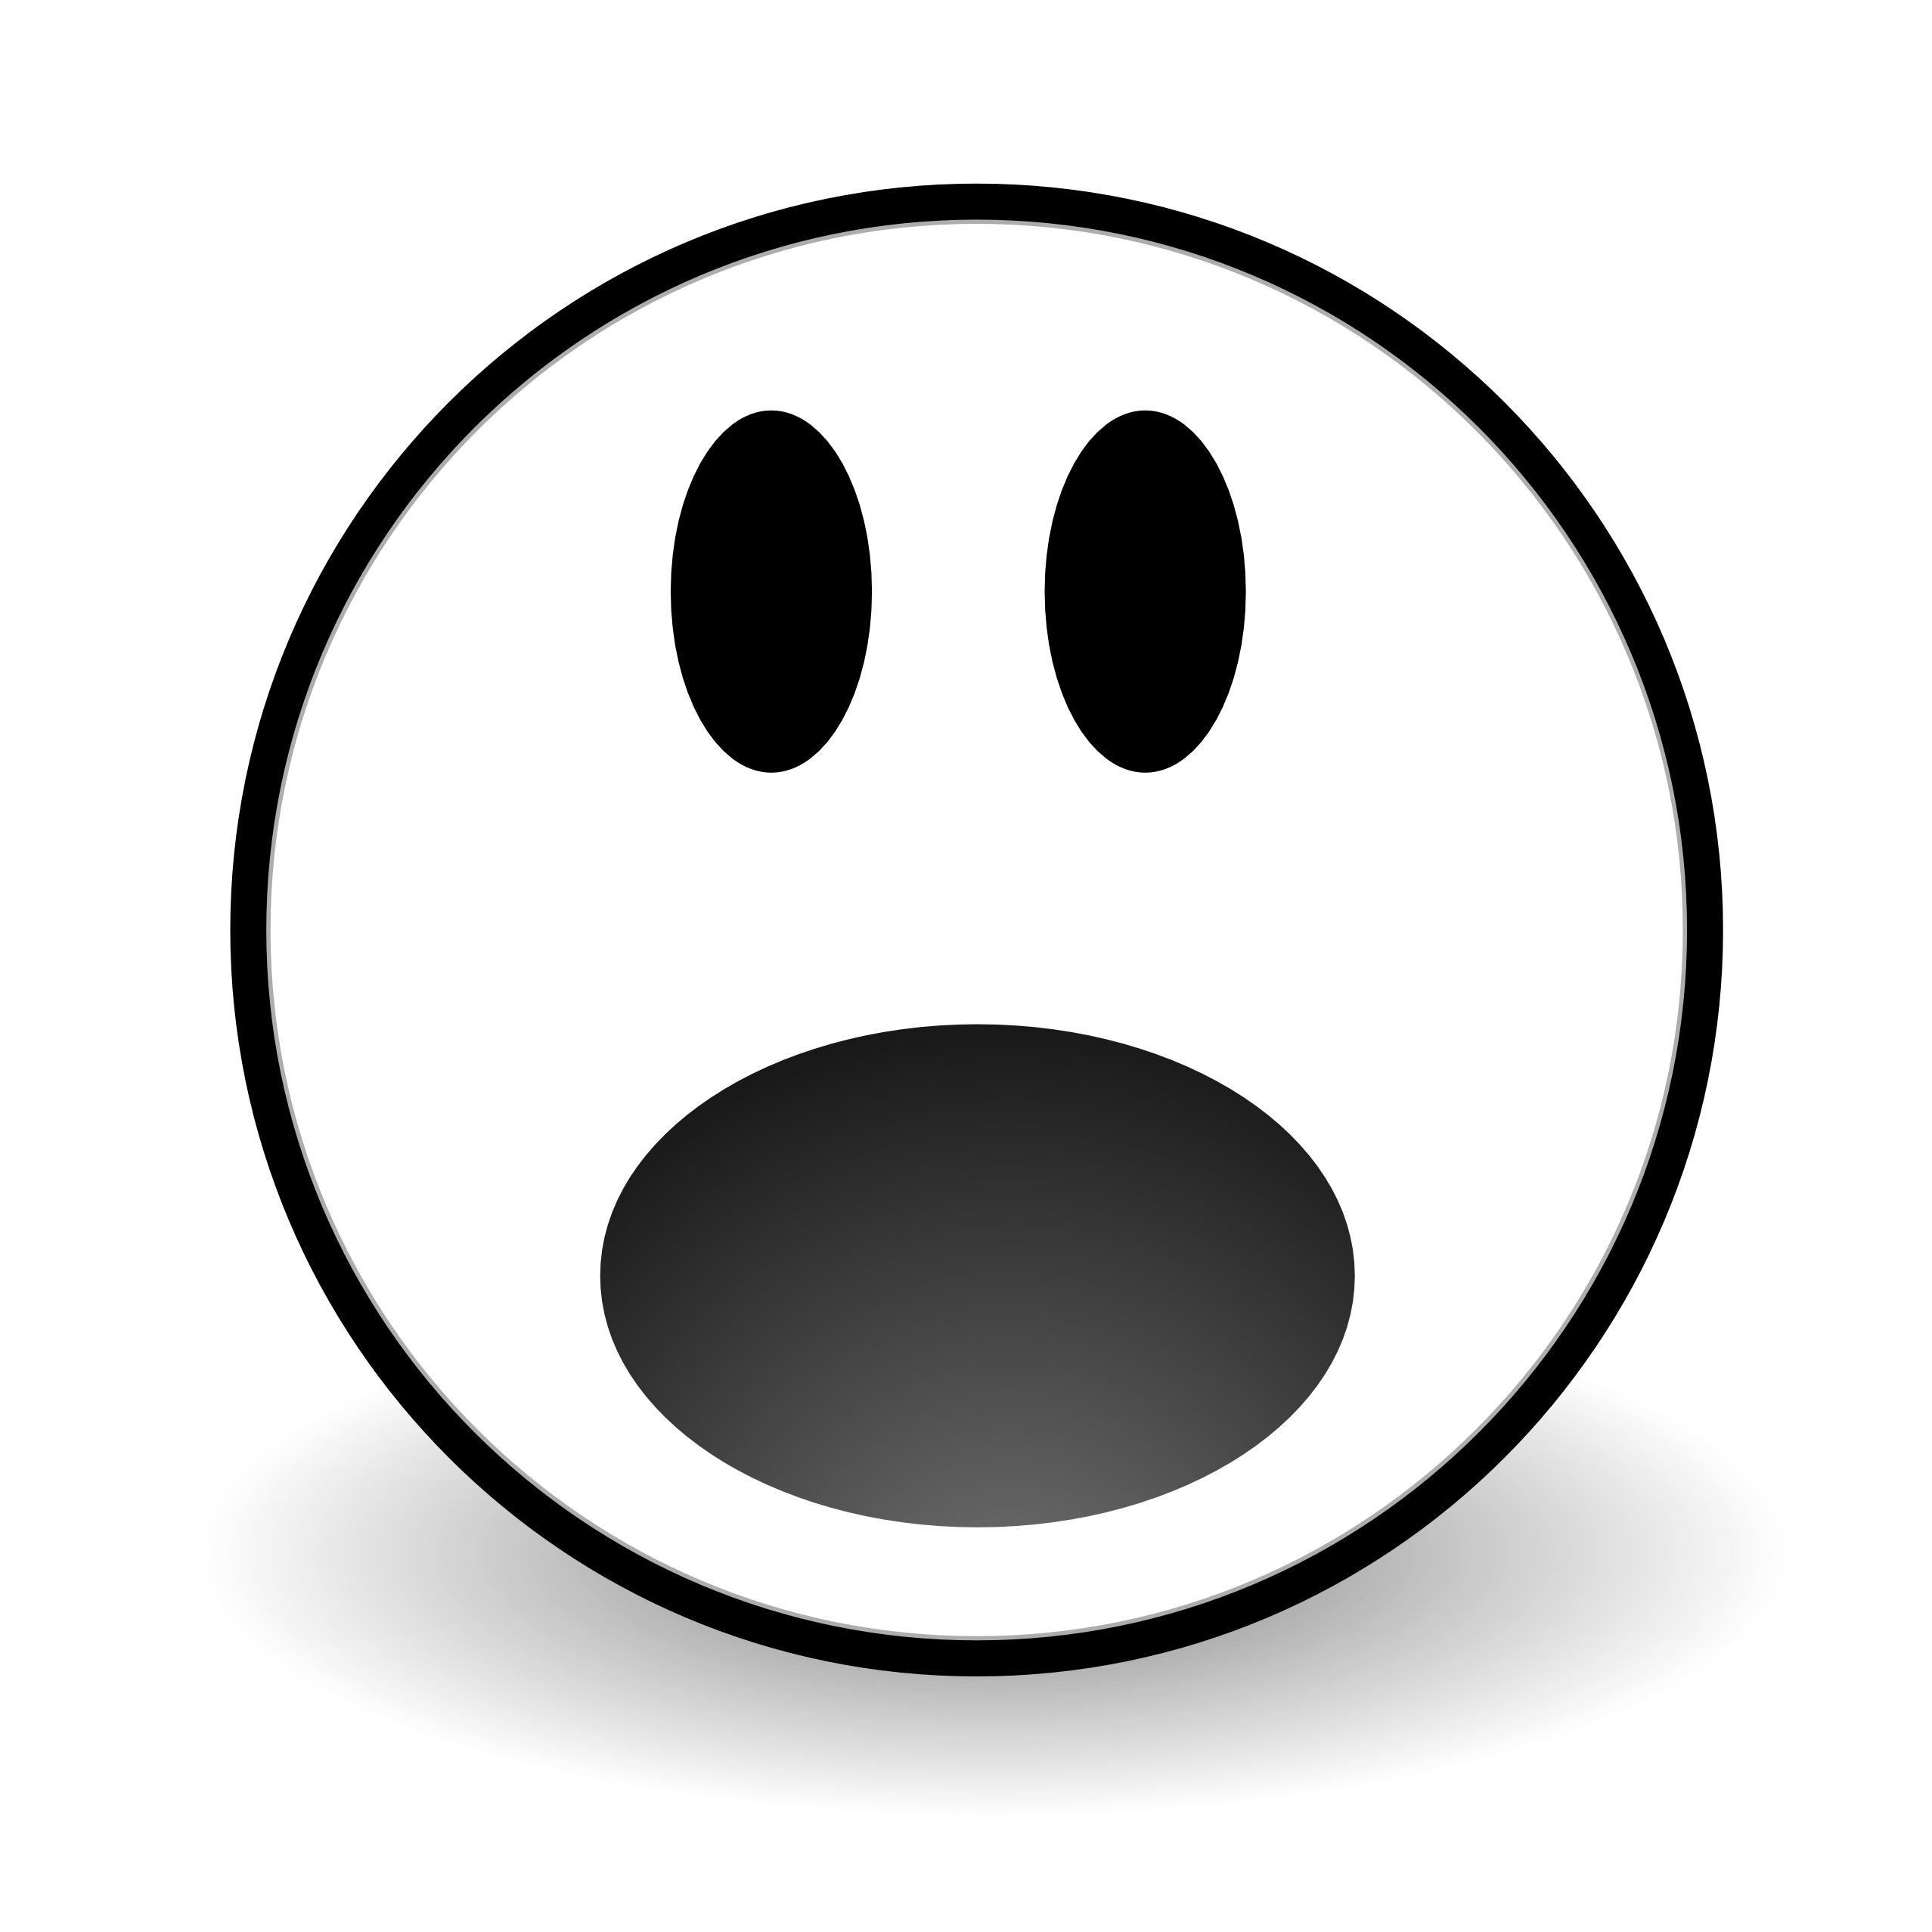 ... Scared Face Clipart - cli - Scared Face Clipart